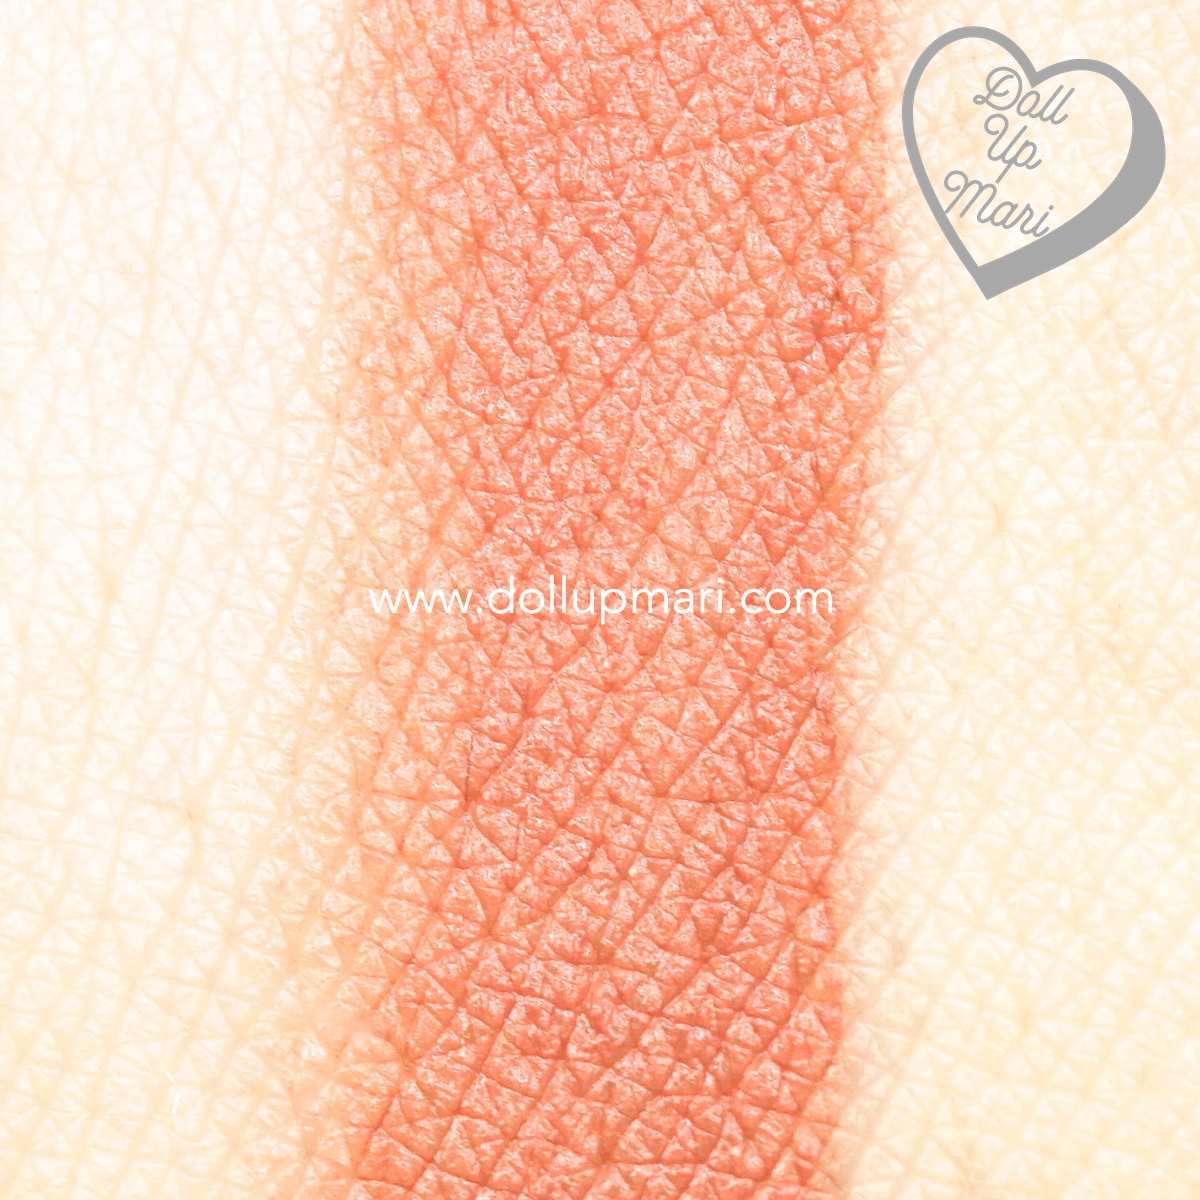 Swatch of Au Naturale shade of AVON Perfectly Matte Lipstick 